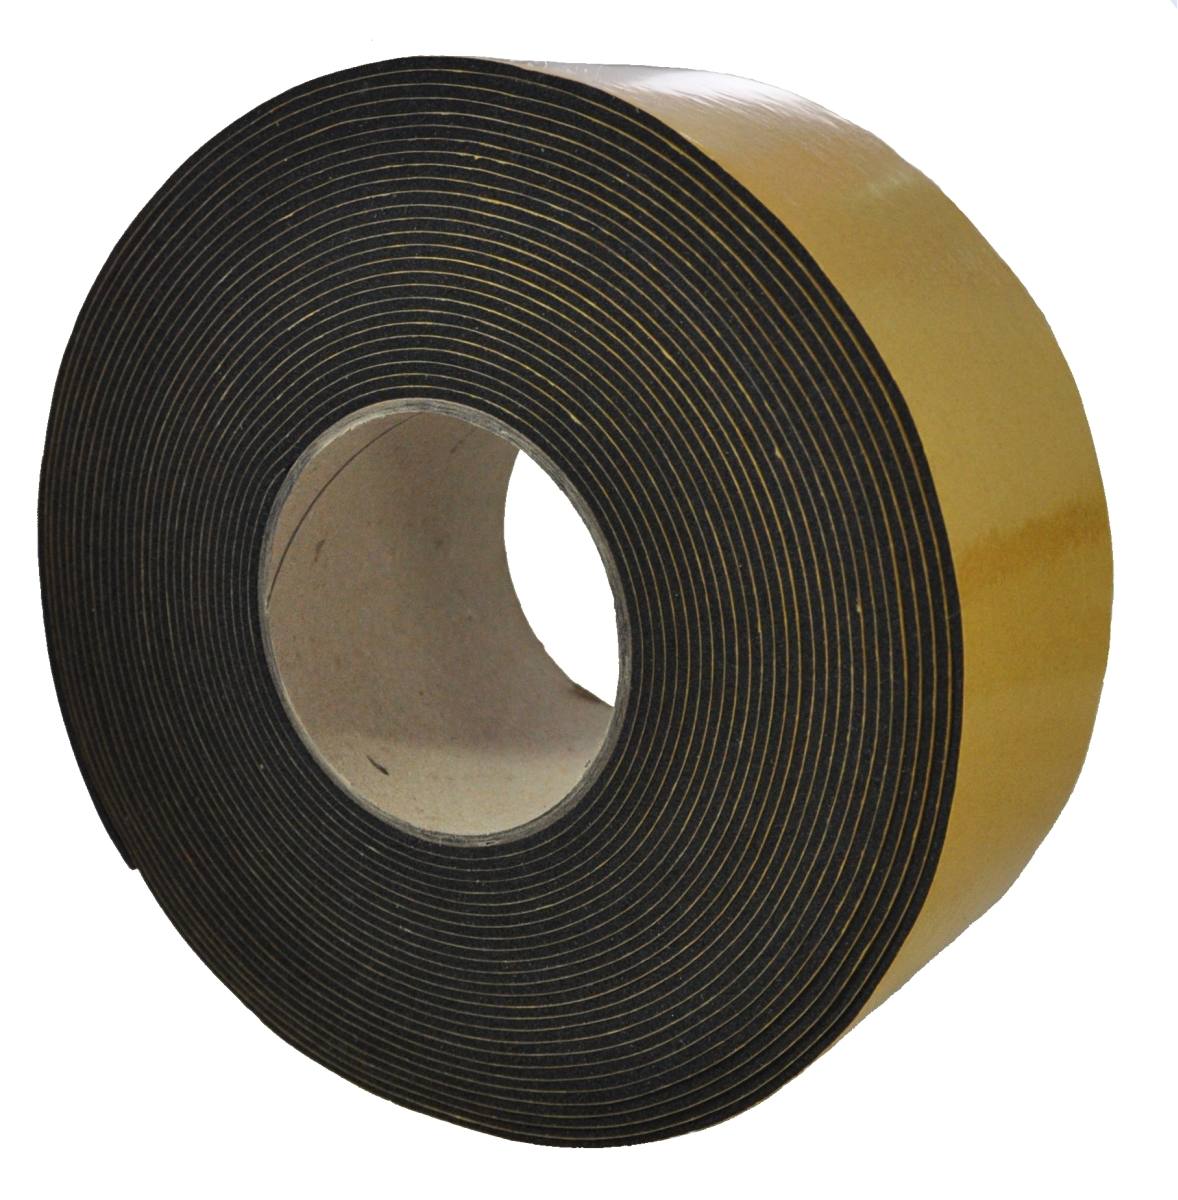 S-K-S EPDM 5mmx25mmx10m black self-adhesive on one side